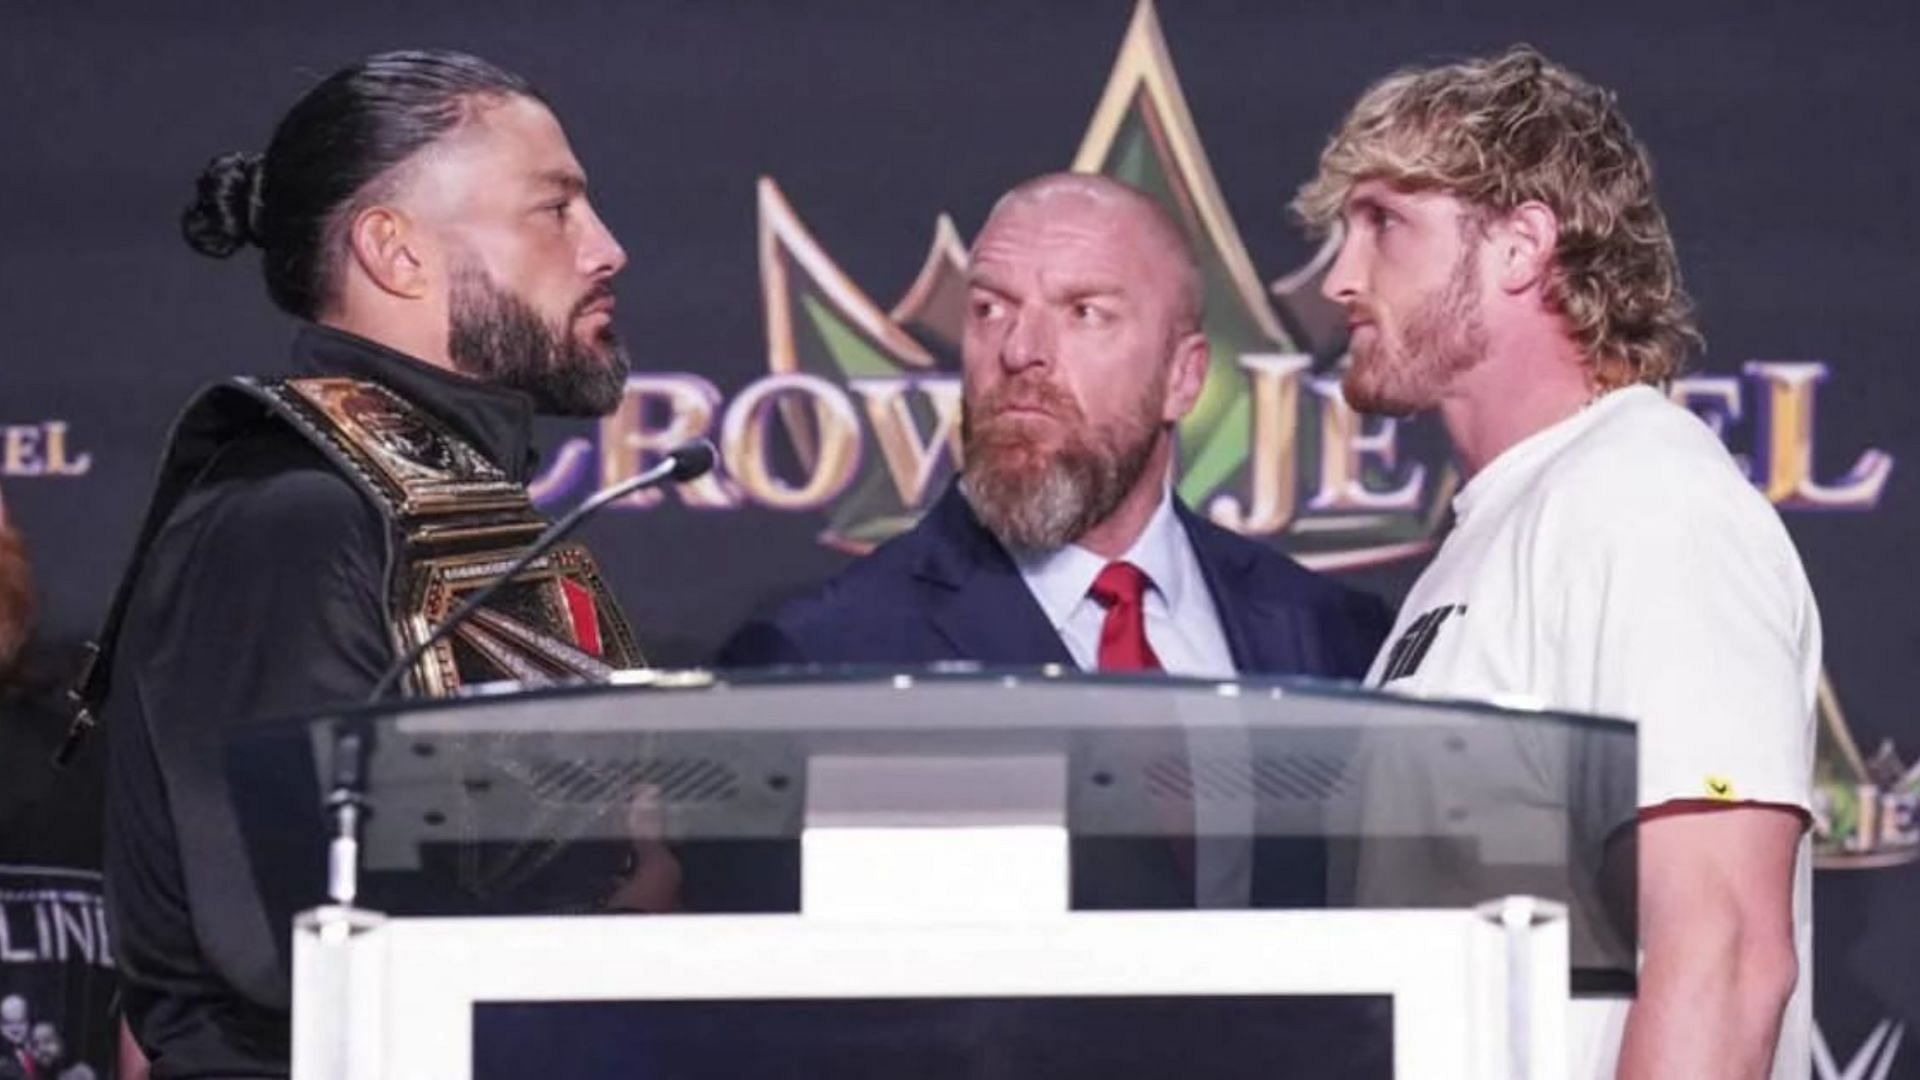 Logan Paul will challenge Roman Reigns for the Undisputed WWE Universal Championship